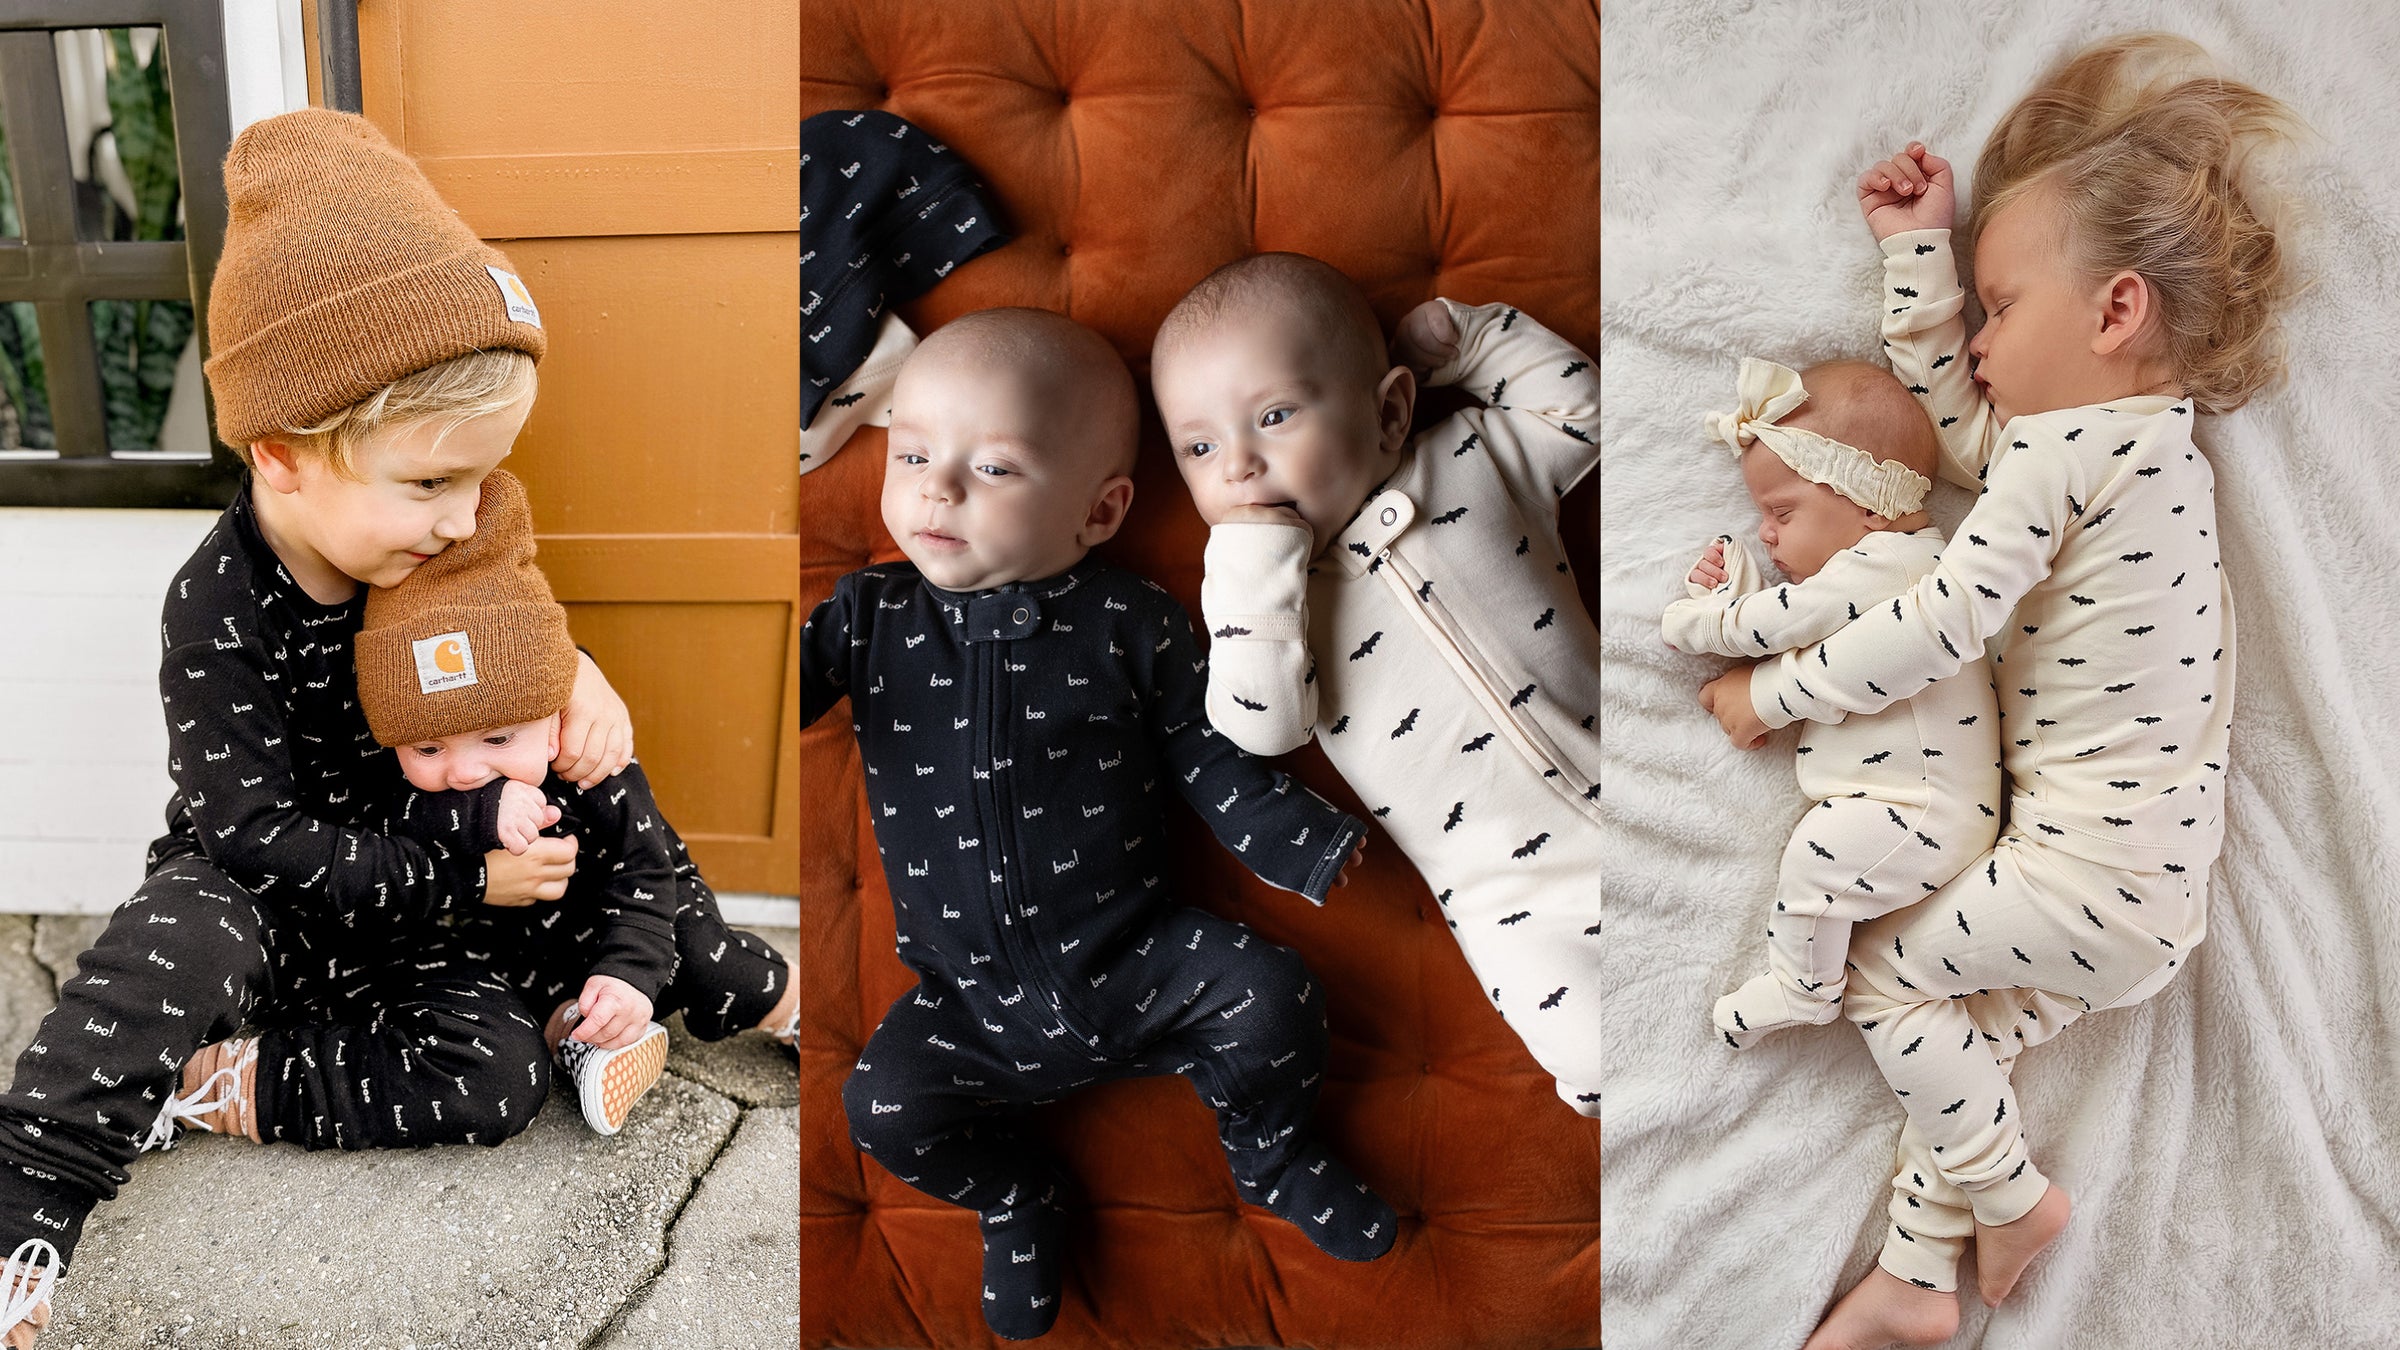 3 lifestyle images side by side, featuring: older child sibling and baby wearing matching "boo" outfits, 2 twin babies one wearing the "boo" footie and one wearing the "bats" footie, and final image is of one older child sibling sleeping alongside younger baby both wearing matching "bats" outfits.